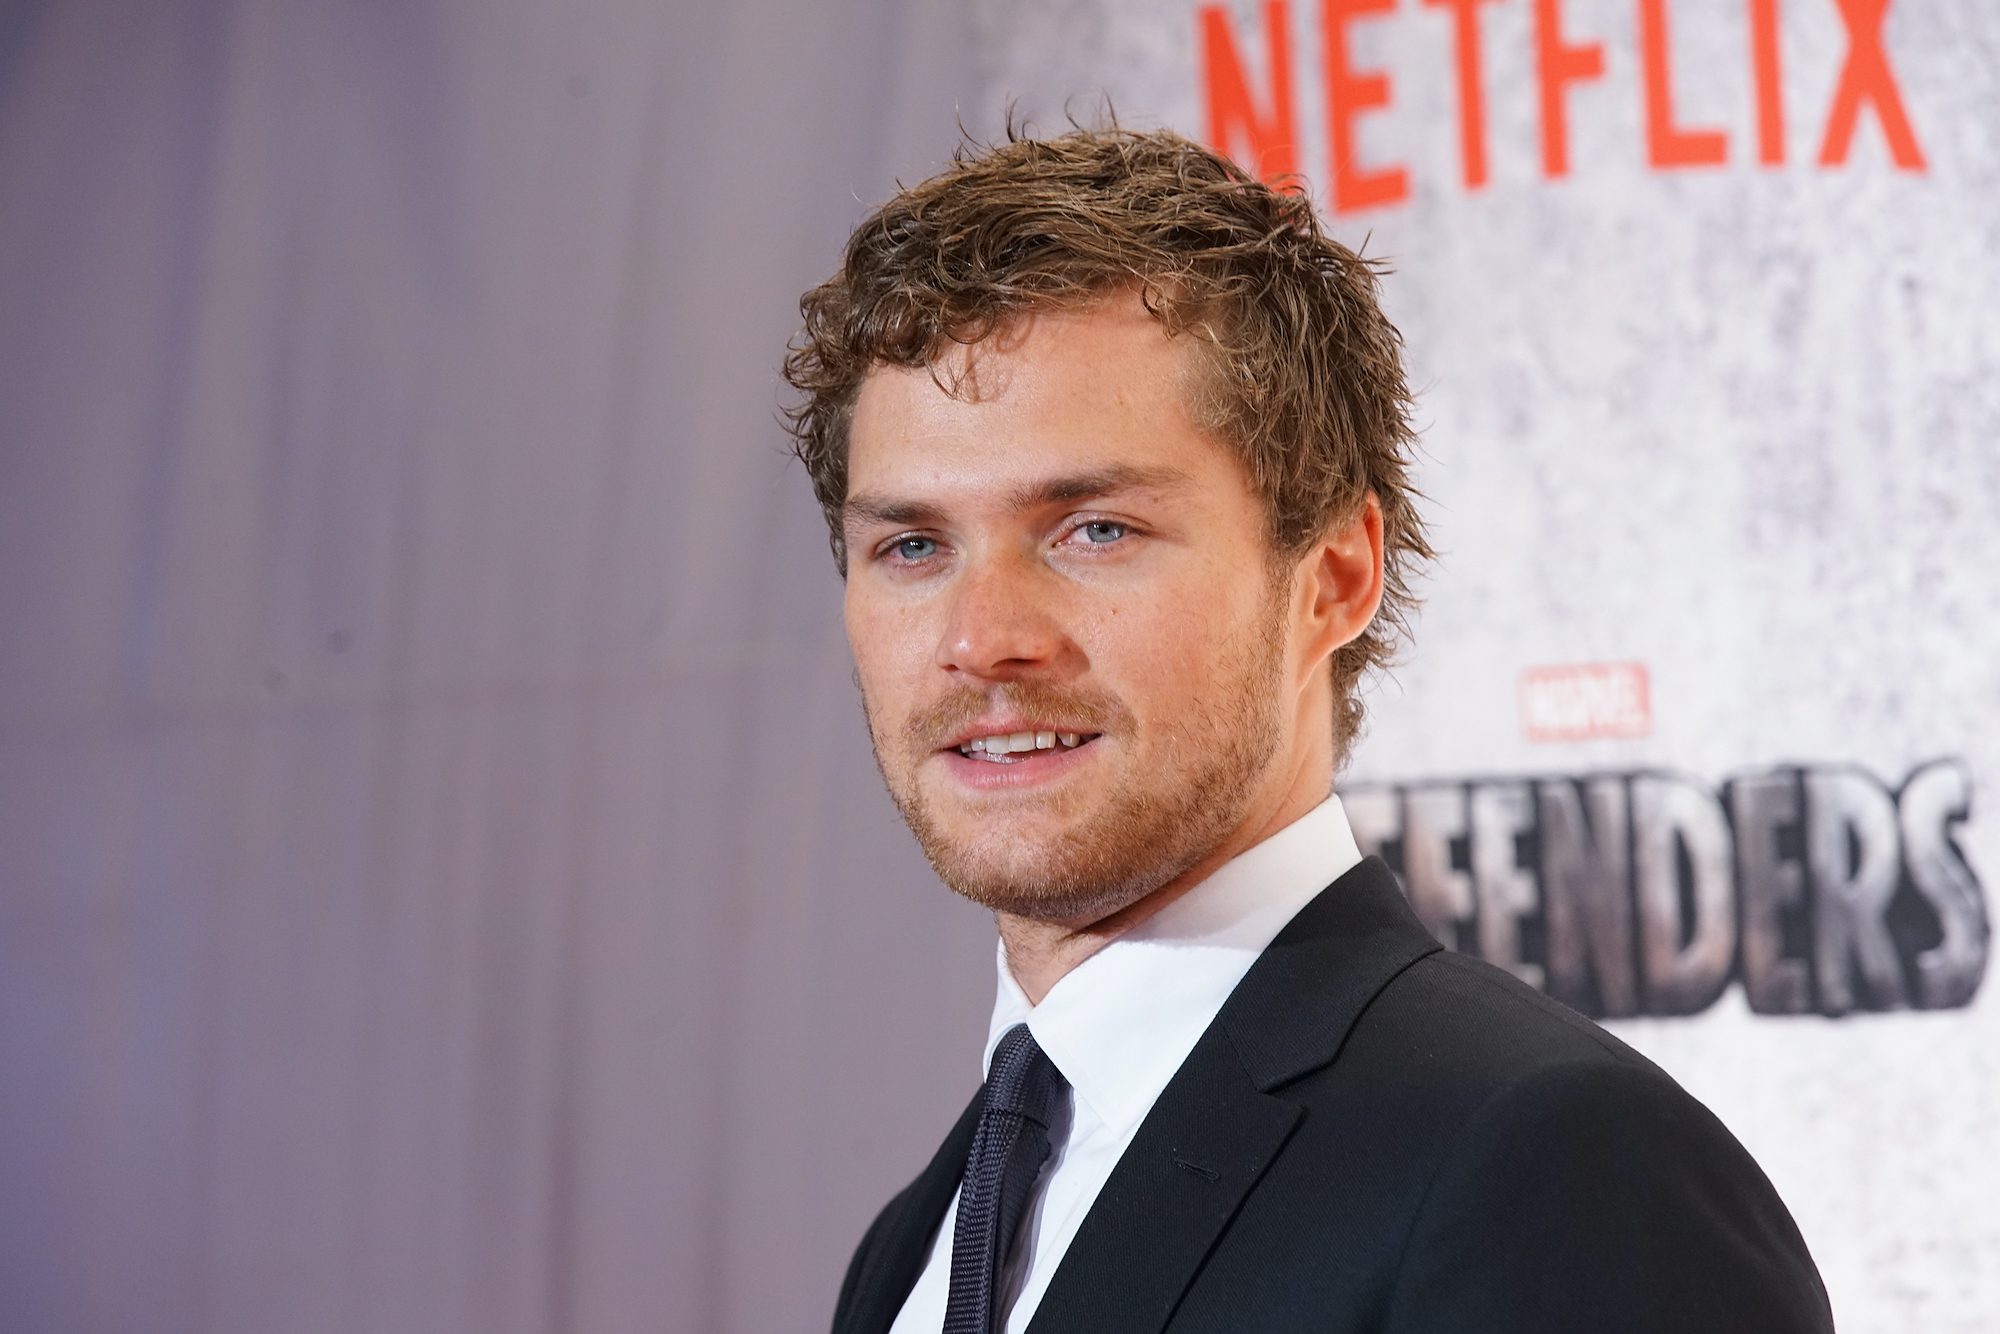 Meeting the Iron Fist cast was like a Tinder date gone wrong